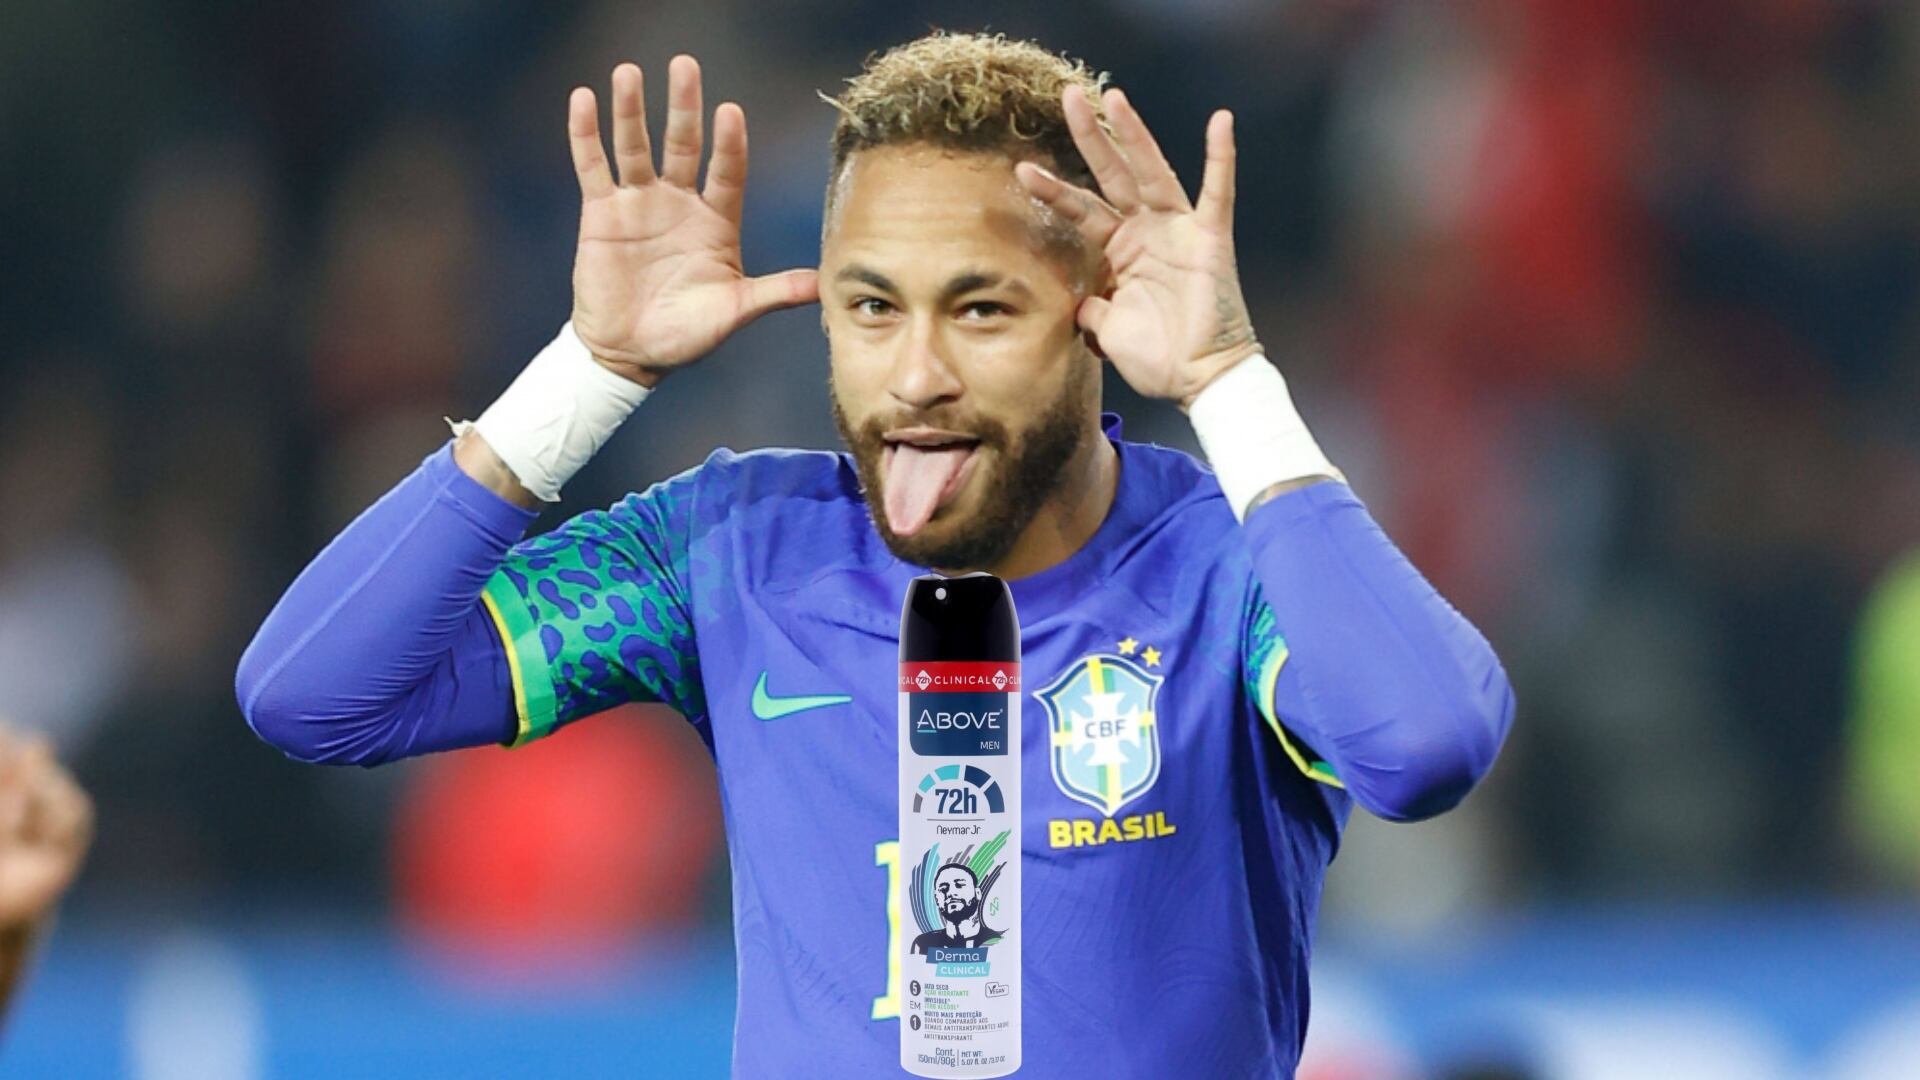 Neymar still more focused on his business than soccer, his recent collab that generates him more than $50M